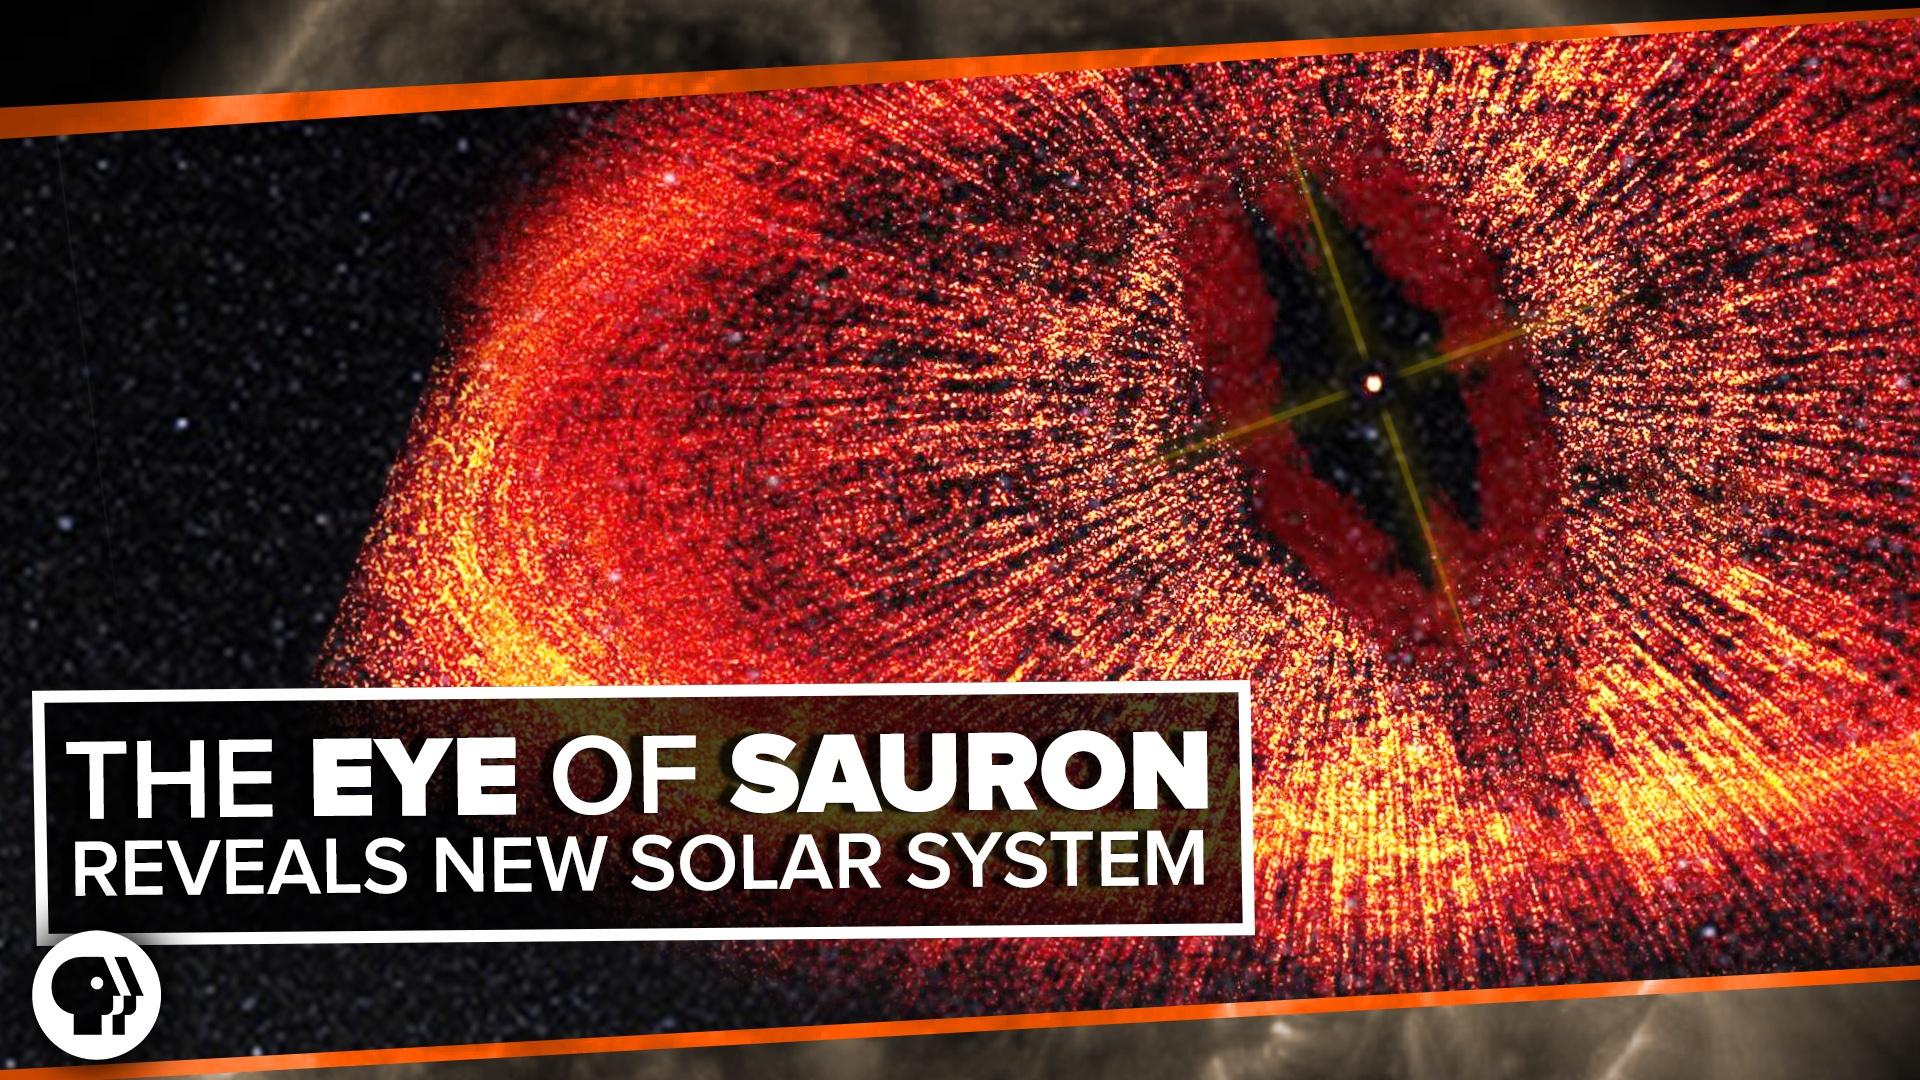 Eye Of Sauron In Space - 1920x1080 Wallpaper 